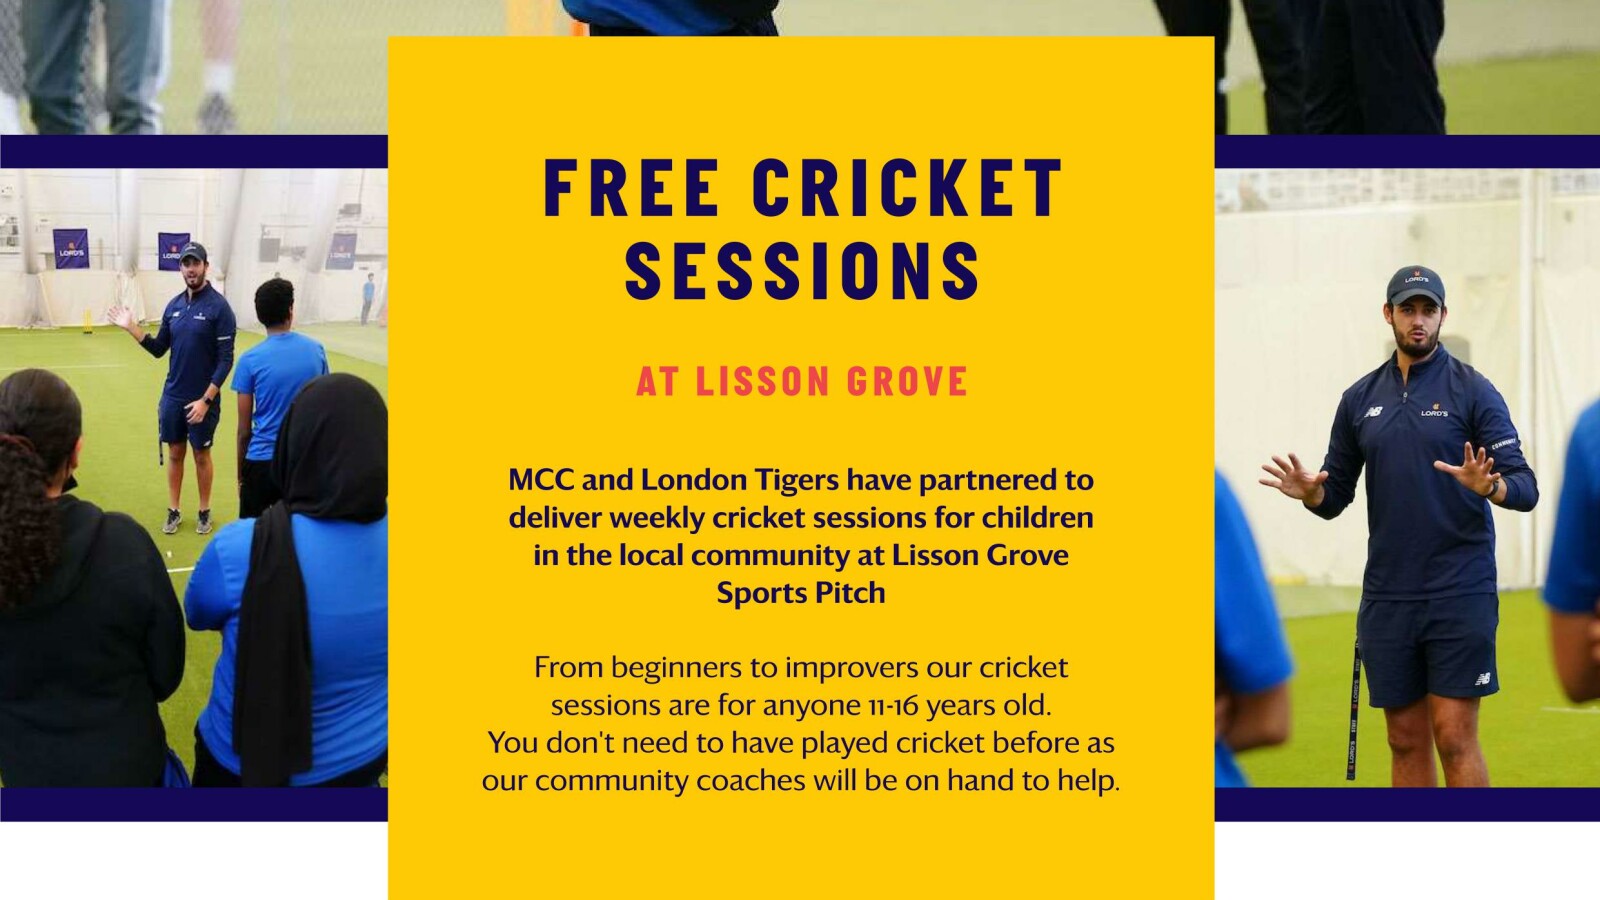 Lisson Grove Cricket Sessions